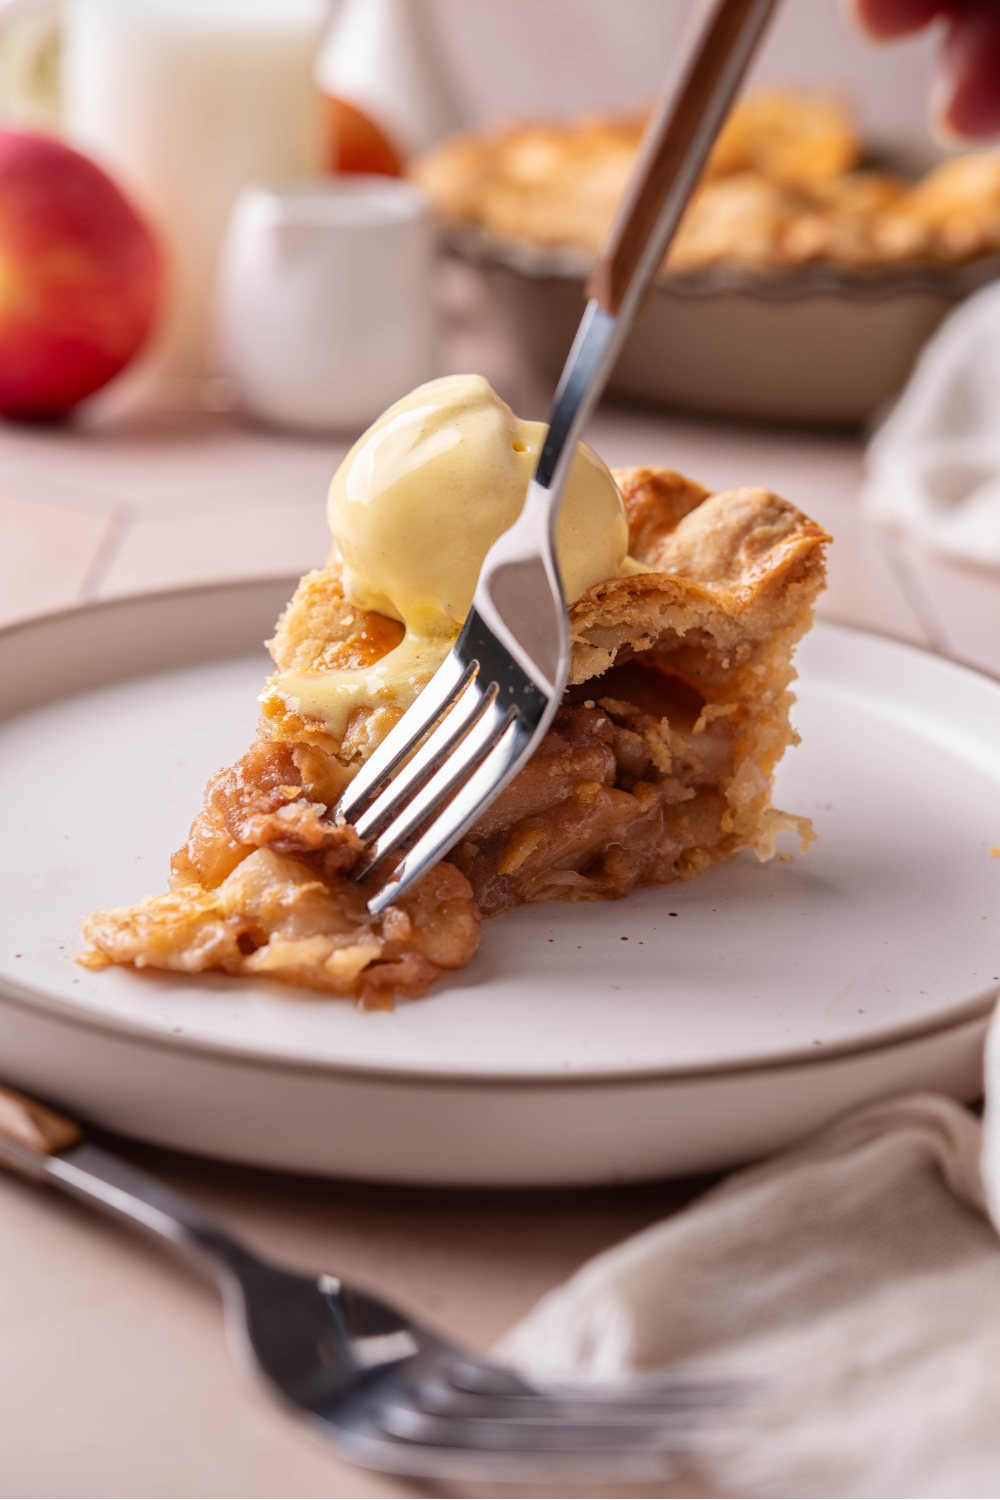 A plate with a slice of apple pie topped with a scoop of vanilla ice cream. A fork is scooping a bite.